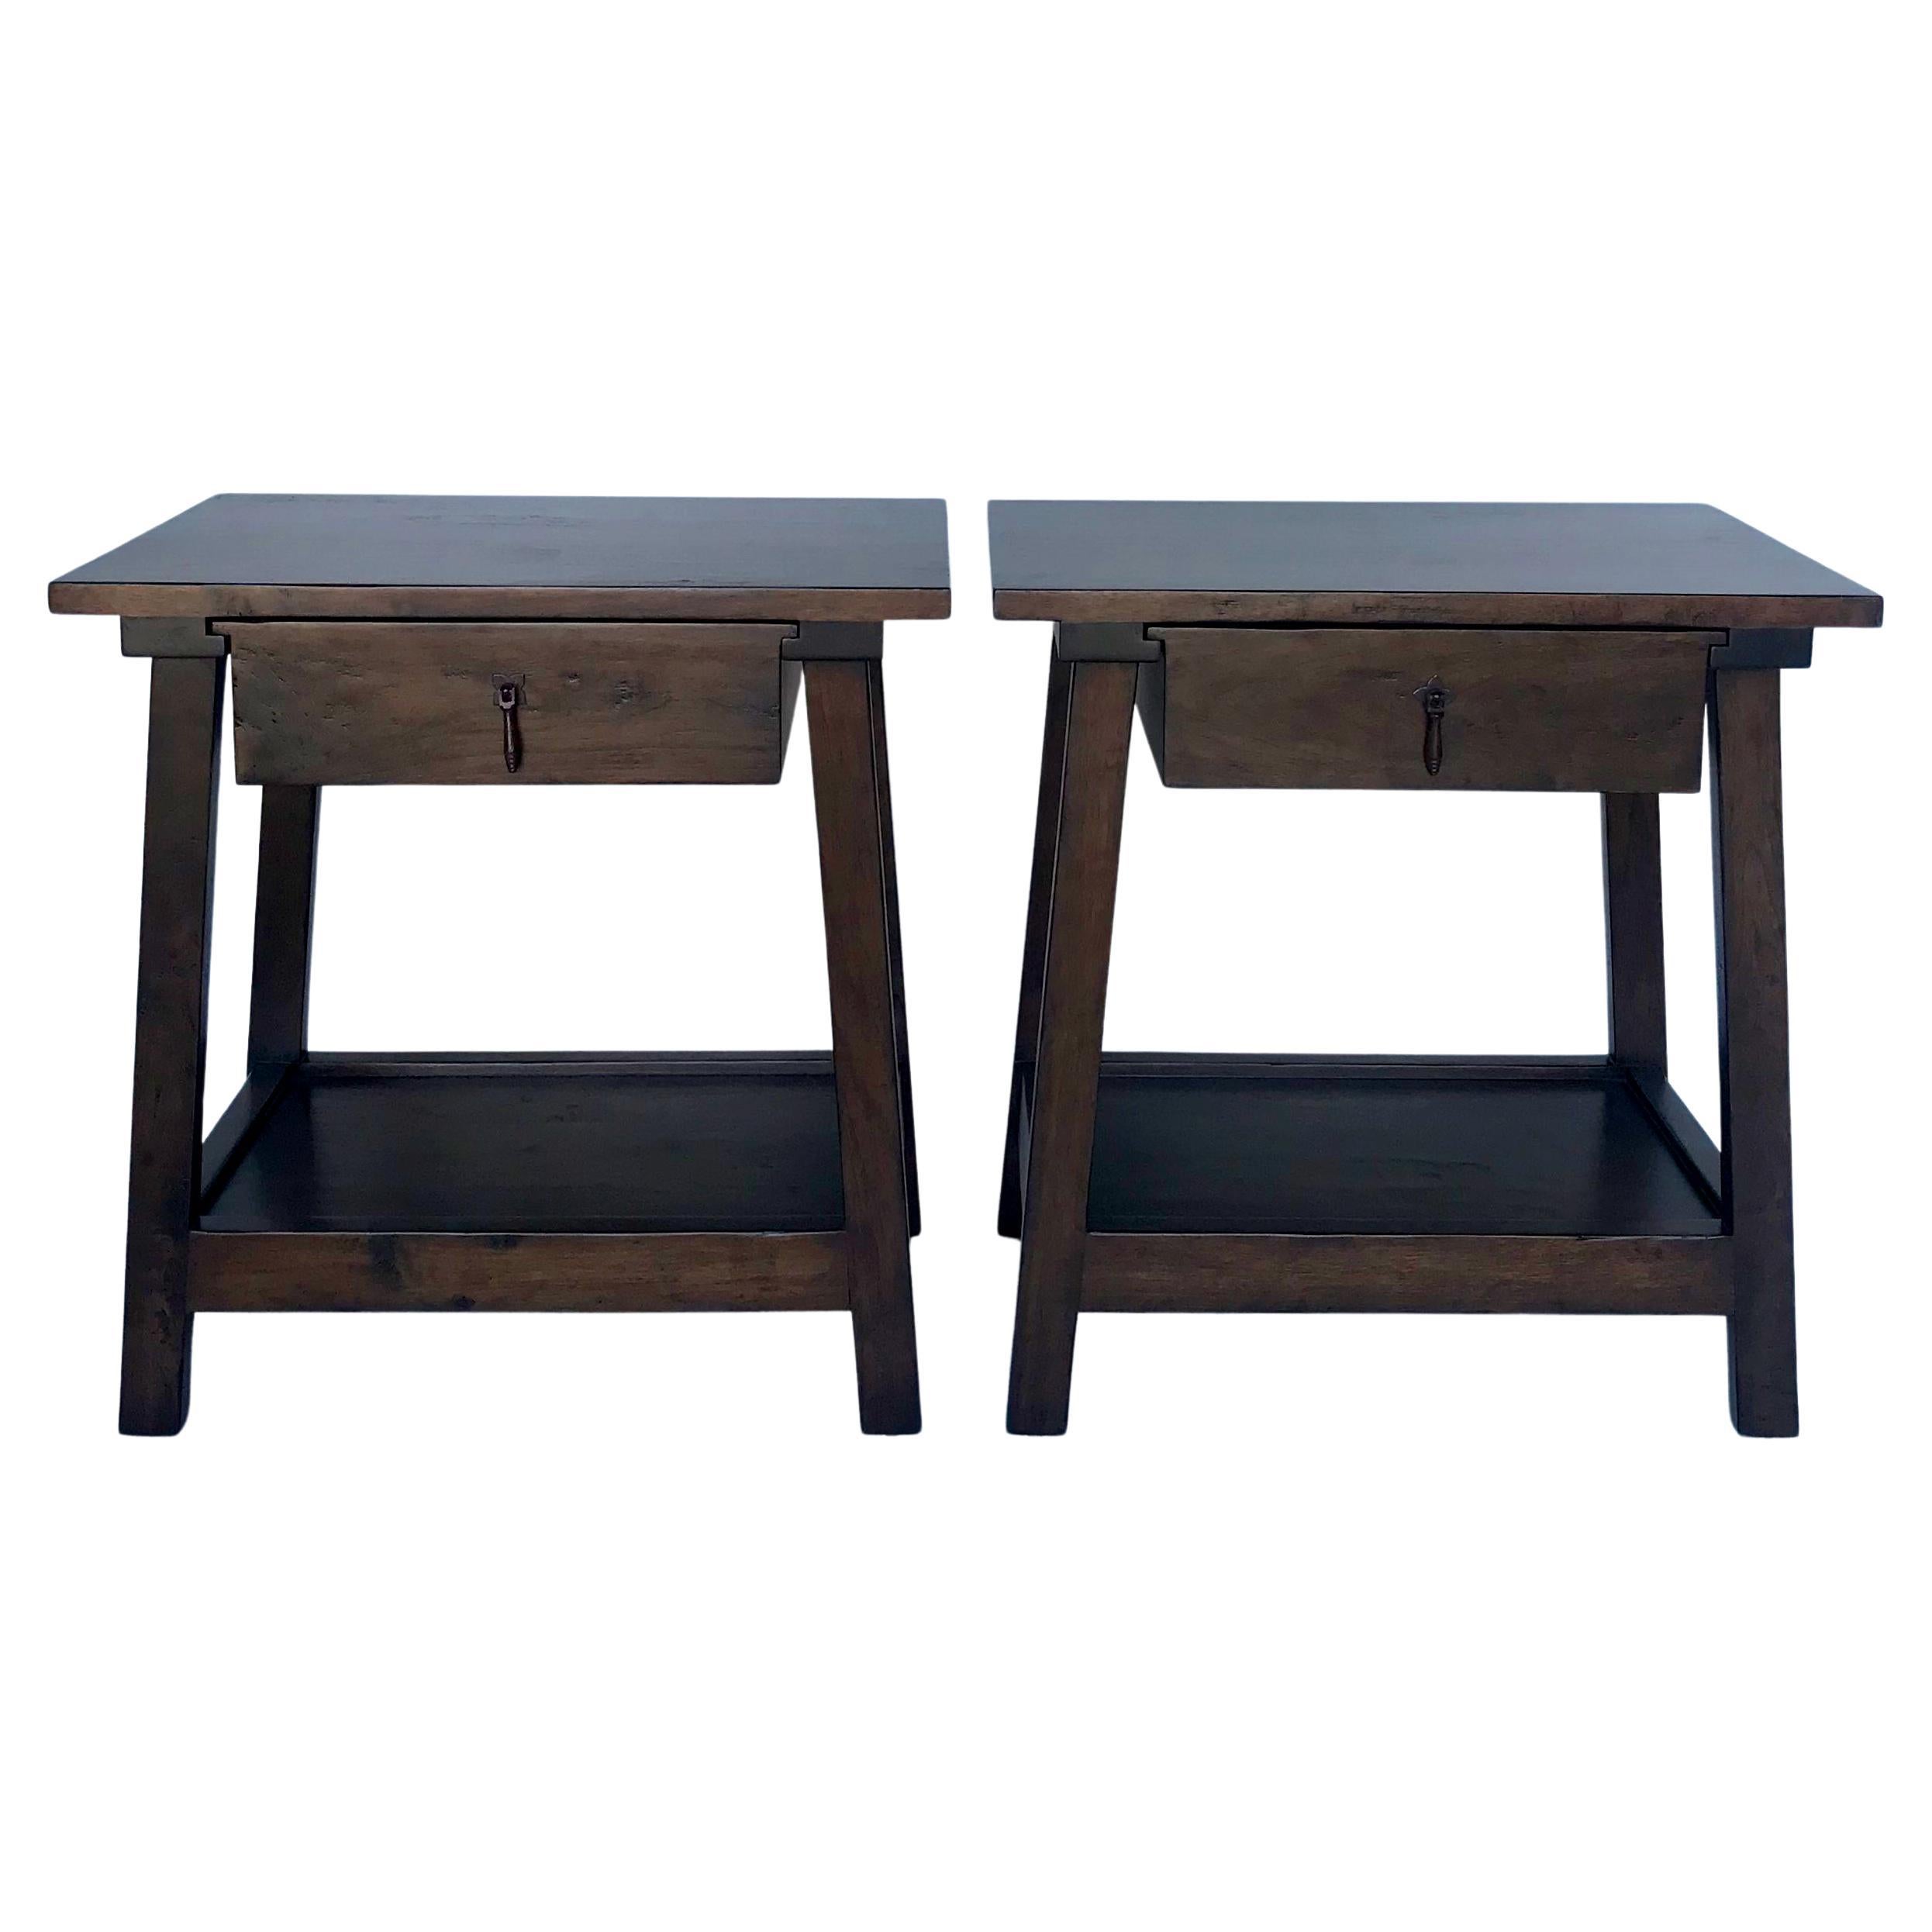 Pair of Walnut Side Tables with Drawer